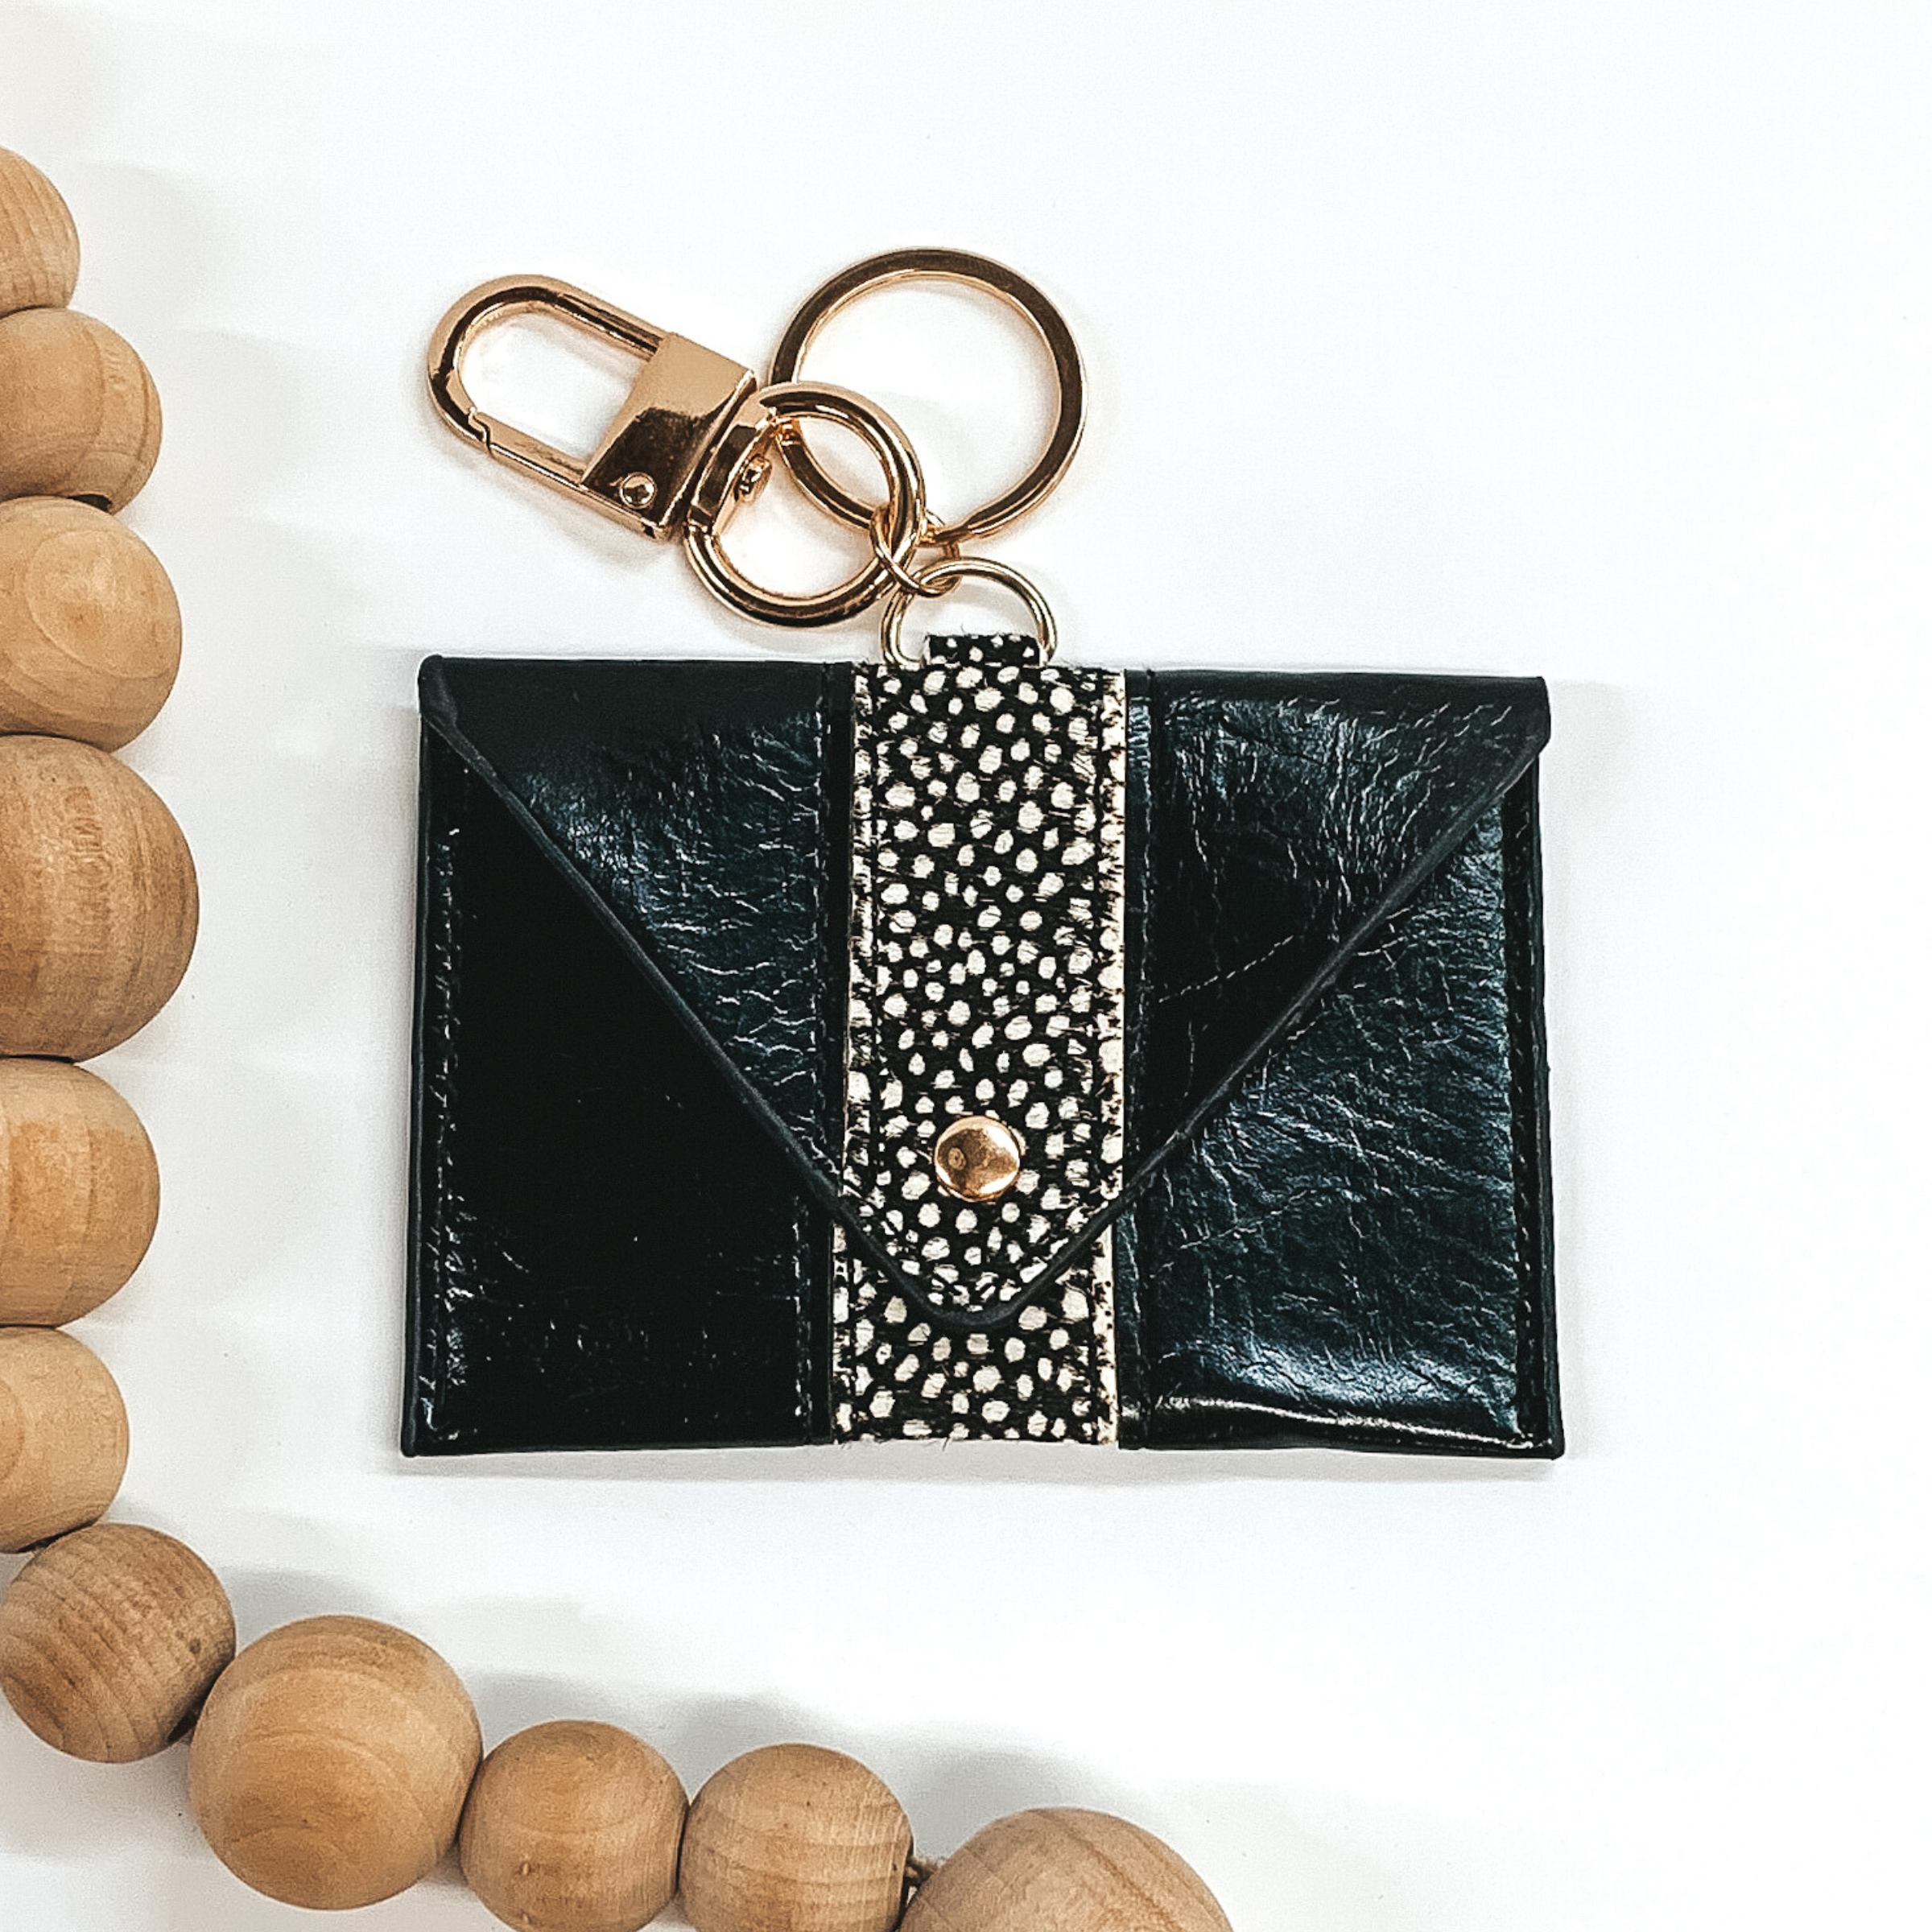 black genuine leather rectangle wallet with hair on hide dotted stripe and snap closure that includes a gold key ring on white background